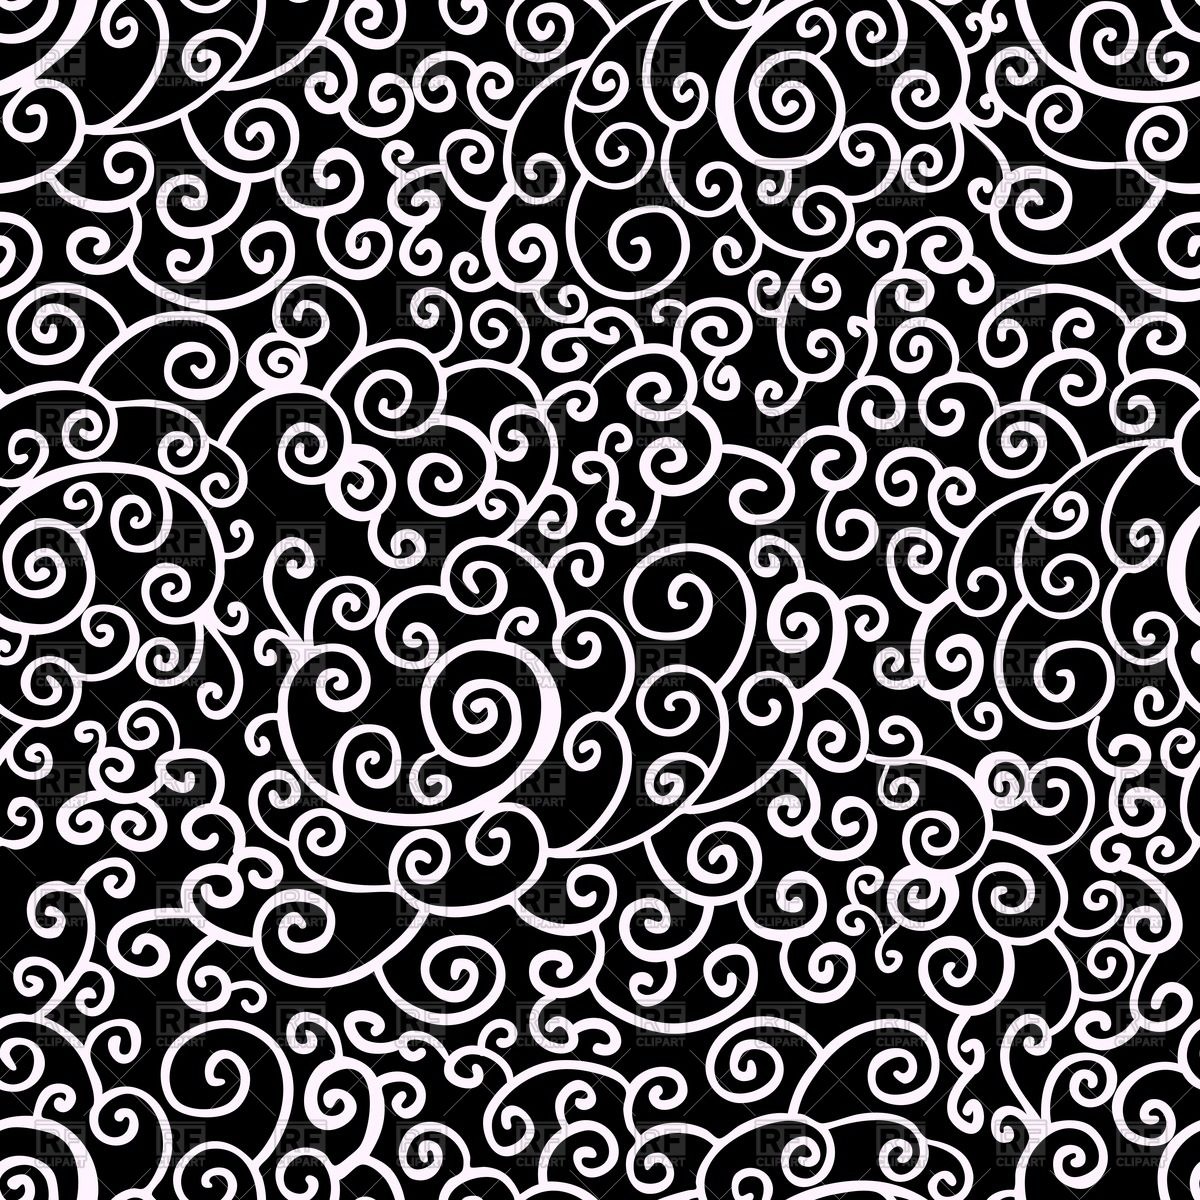 Black And White Abstract Swirl Seamless Pattern Background